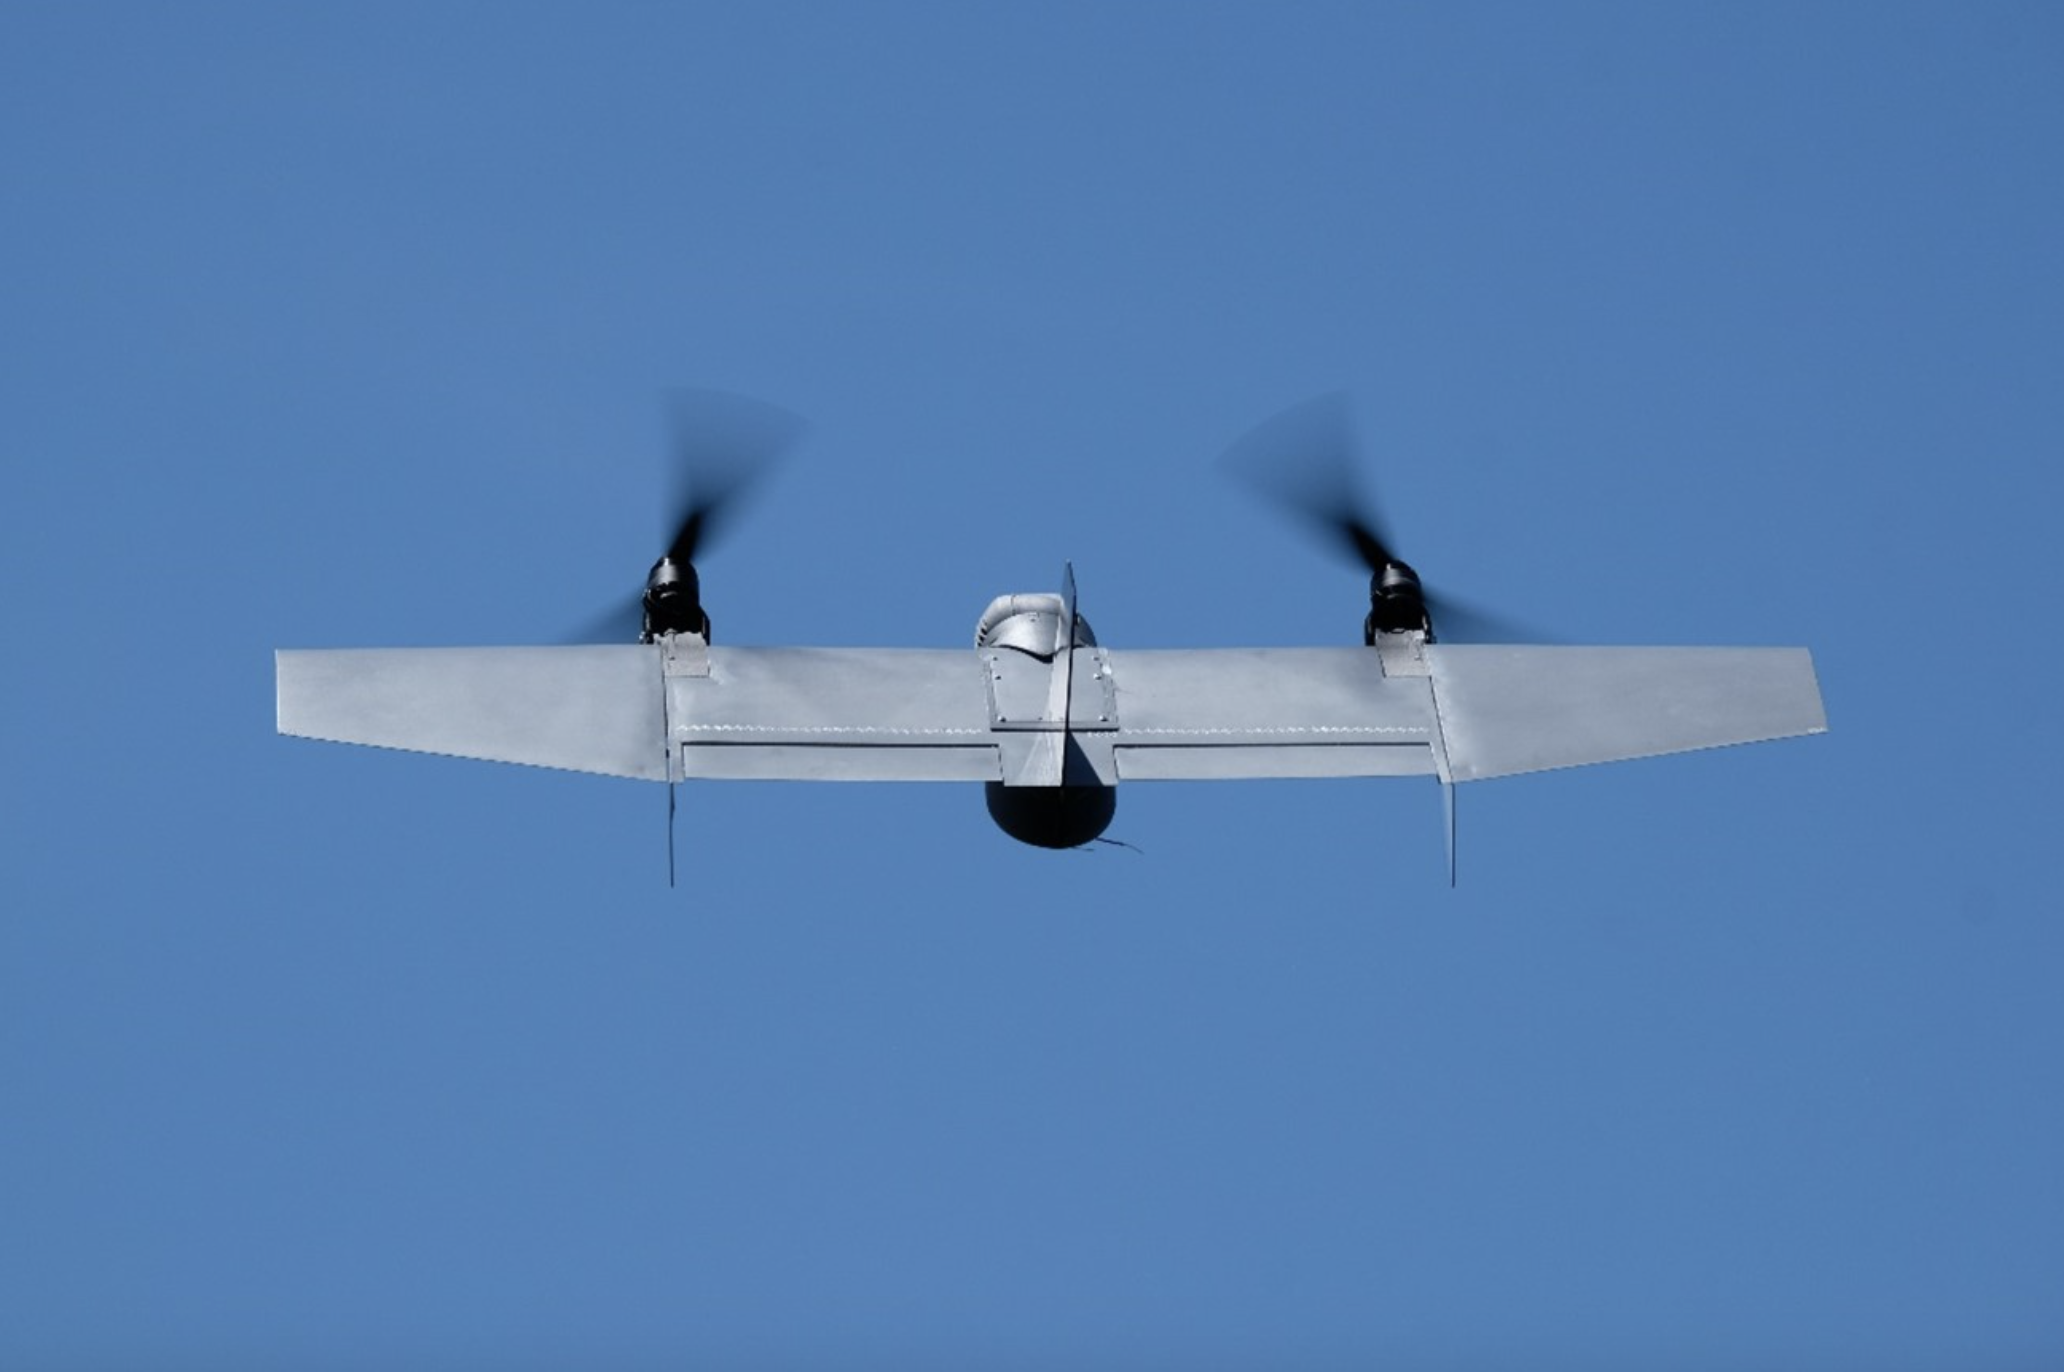 A drone mid-flight against a blue sky